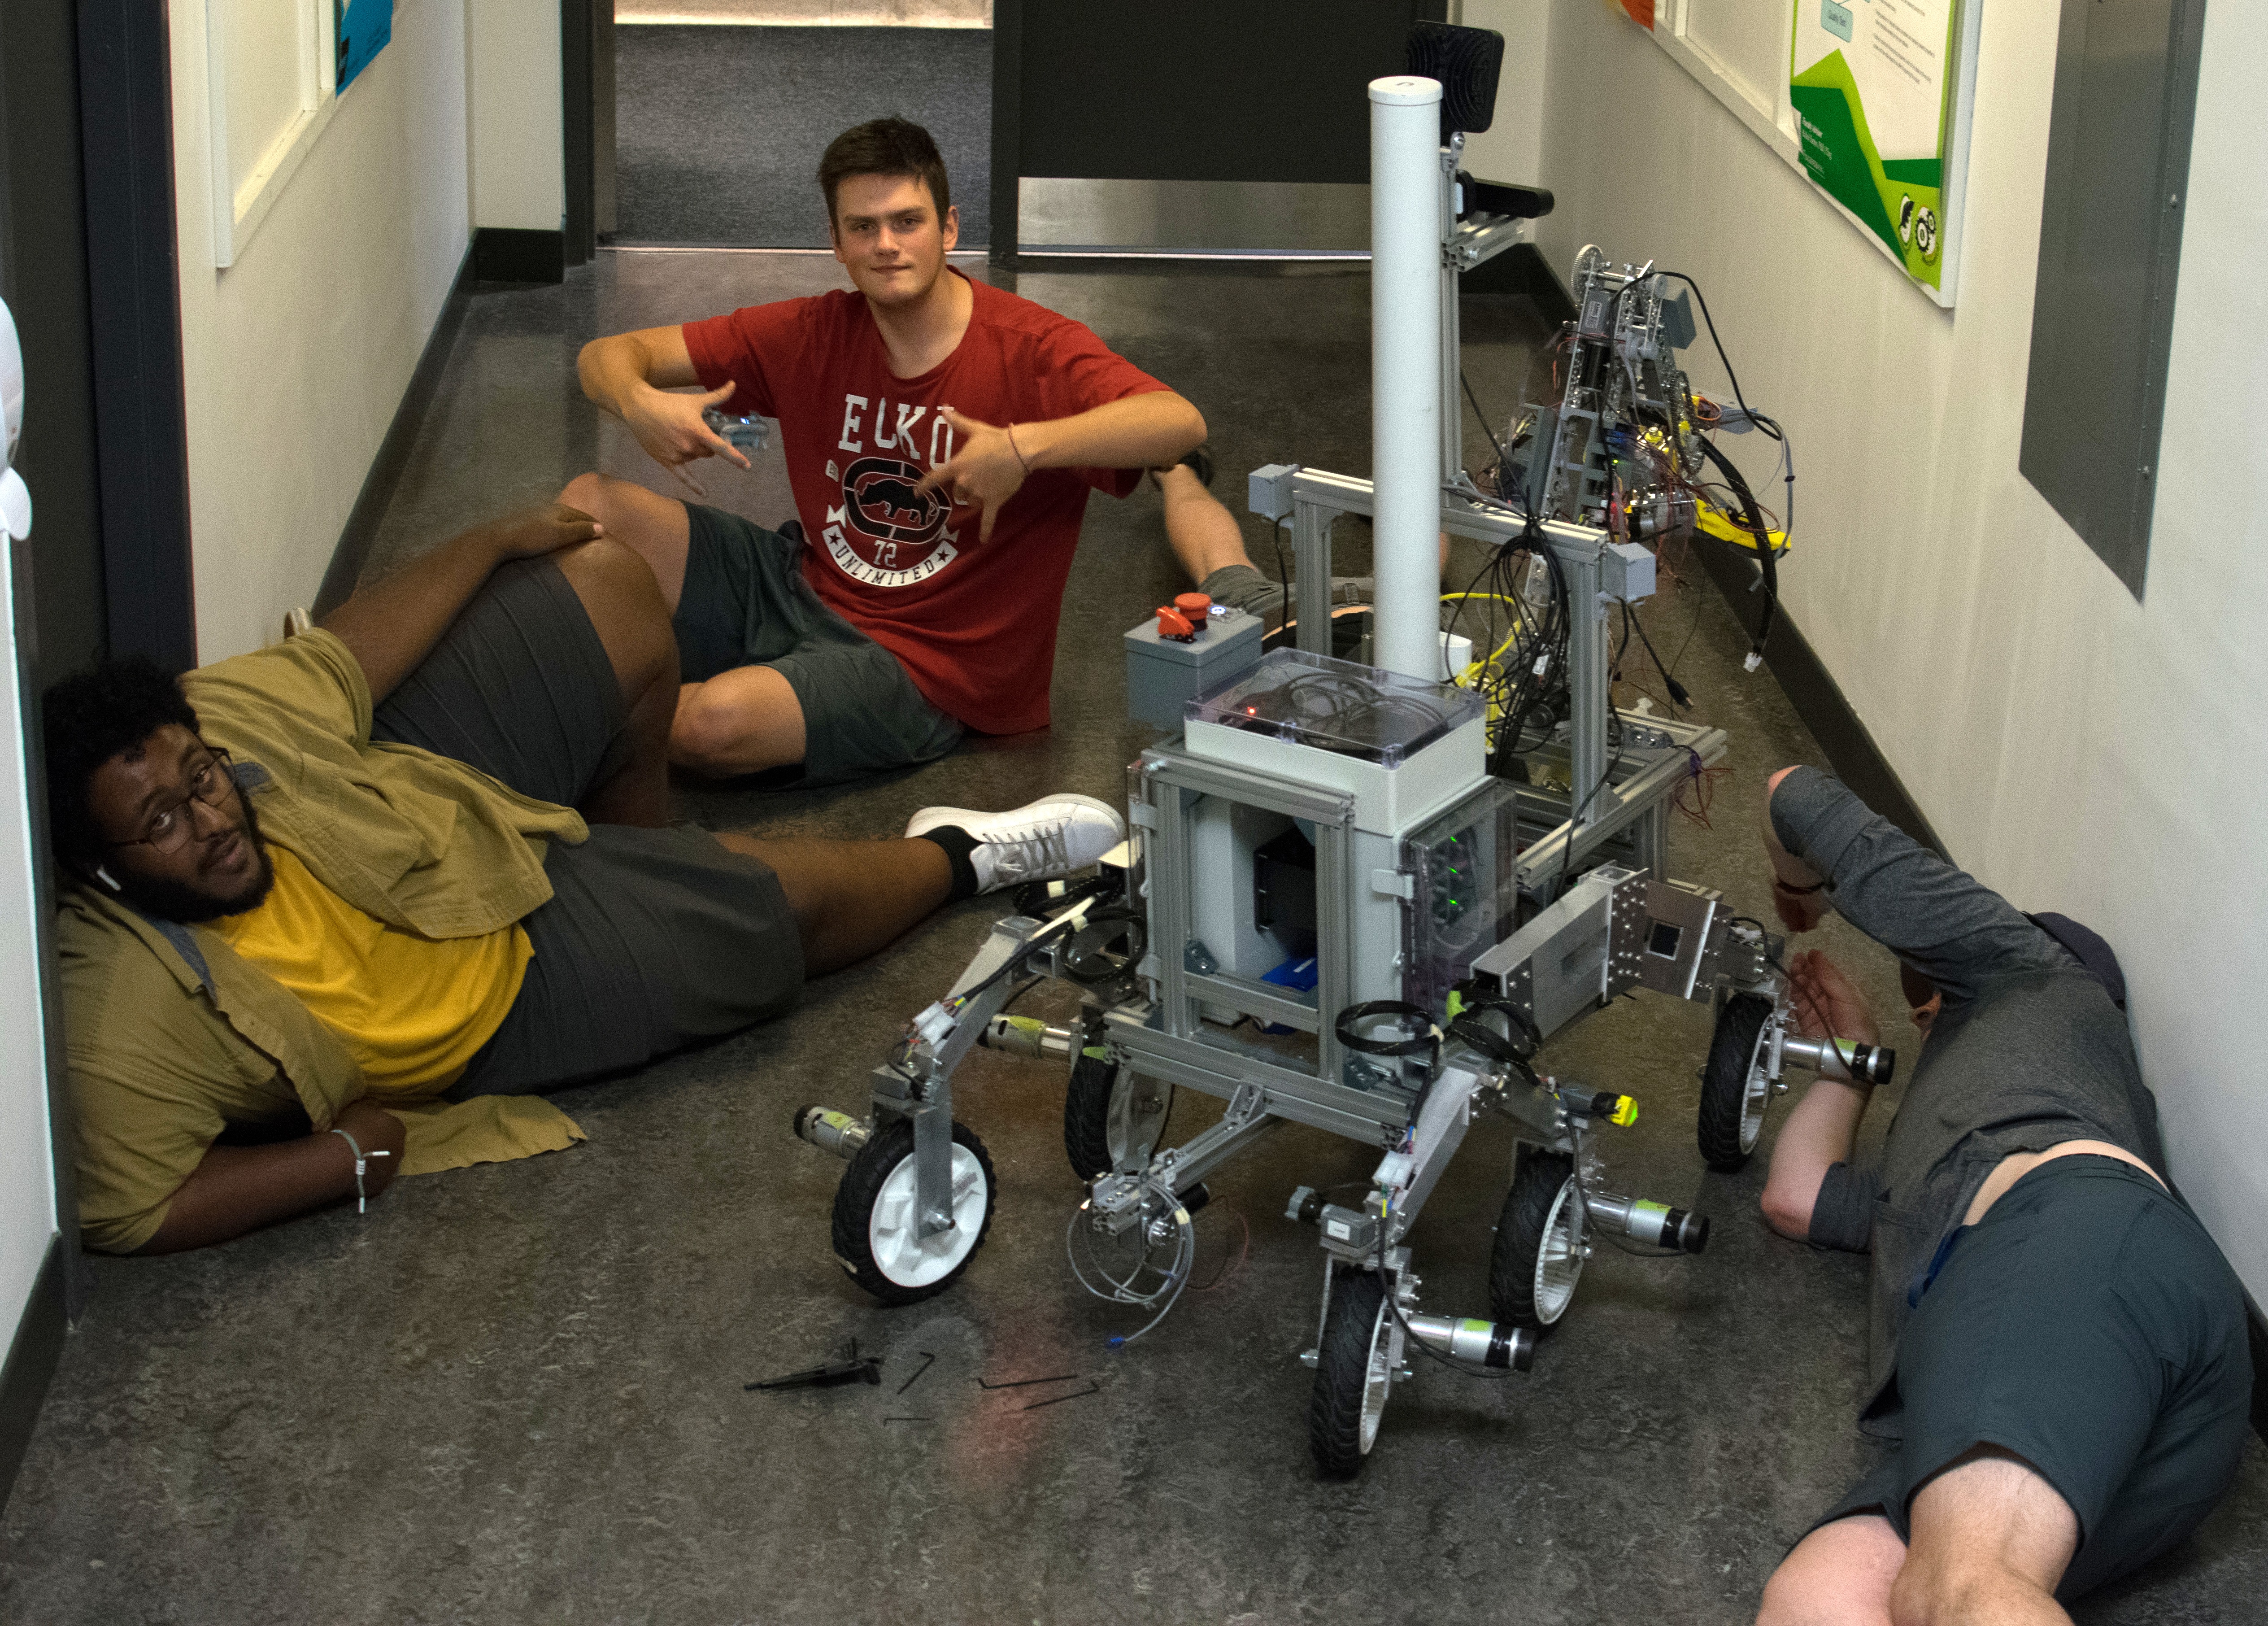 three people sit and lie on the floor of a university hallway and adjust a rover vehicle